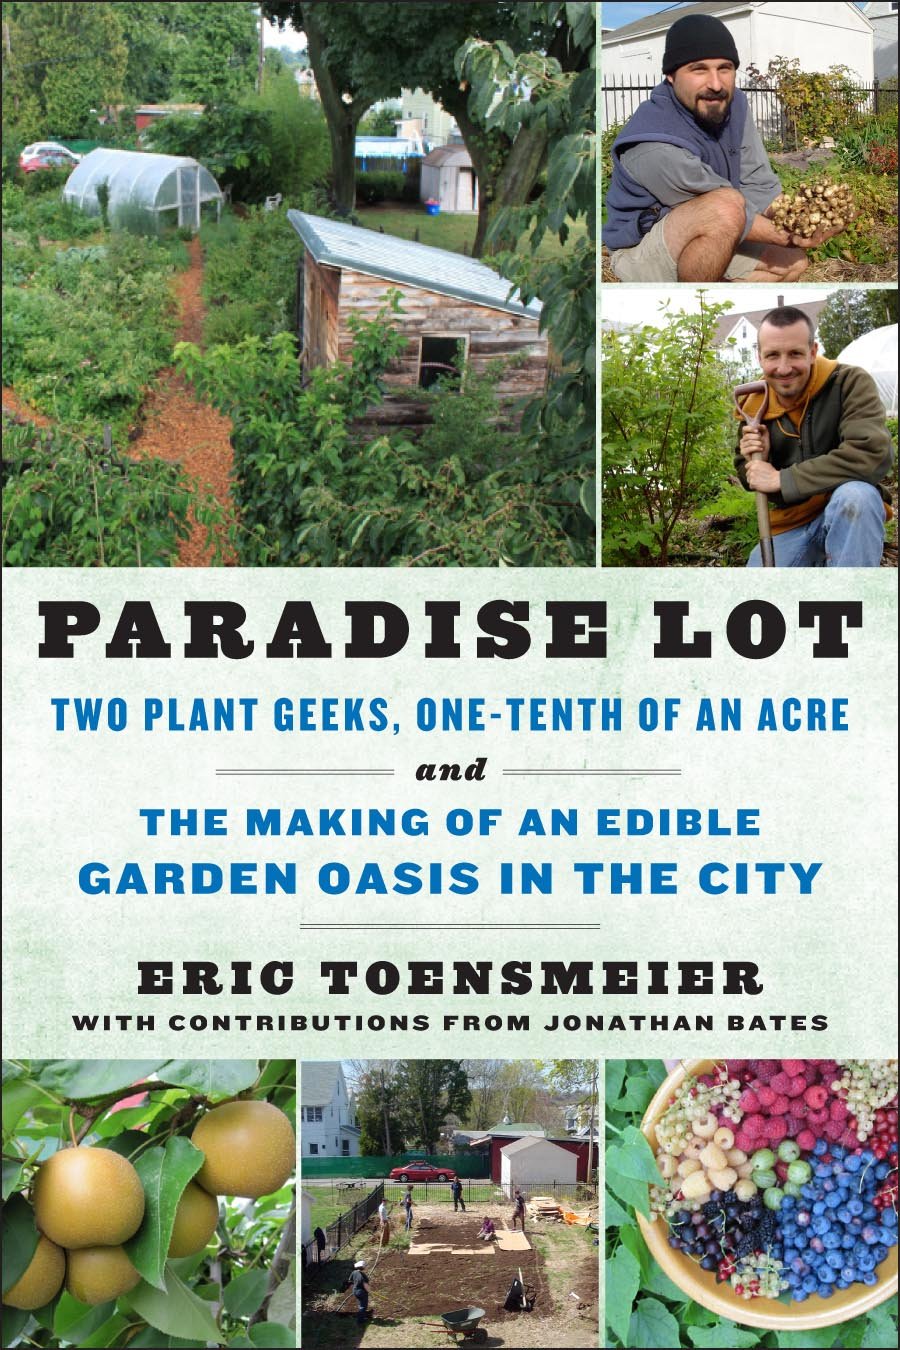 The Blundering Gardener: What on Earth are you thinking? – Twin Cities